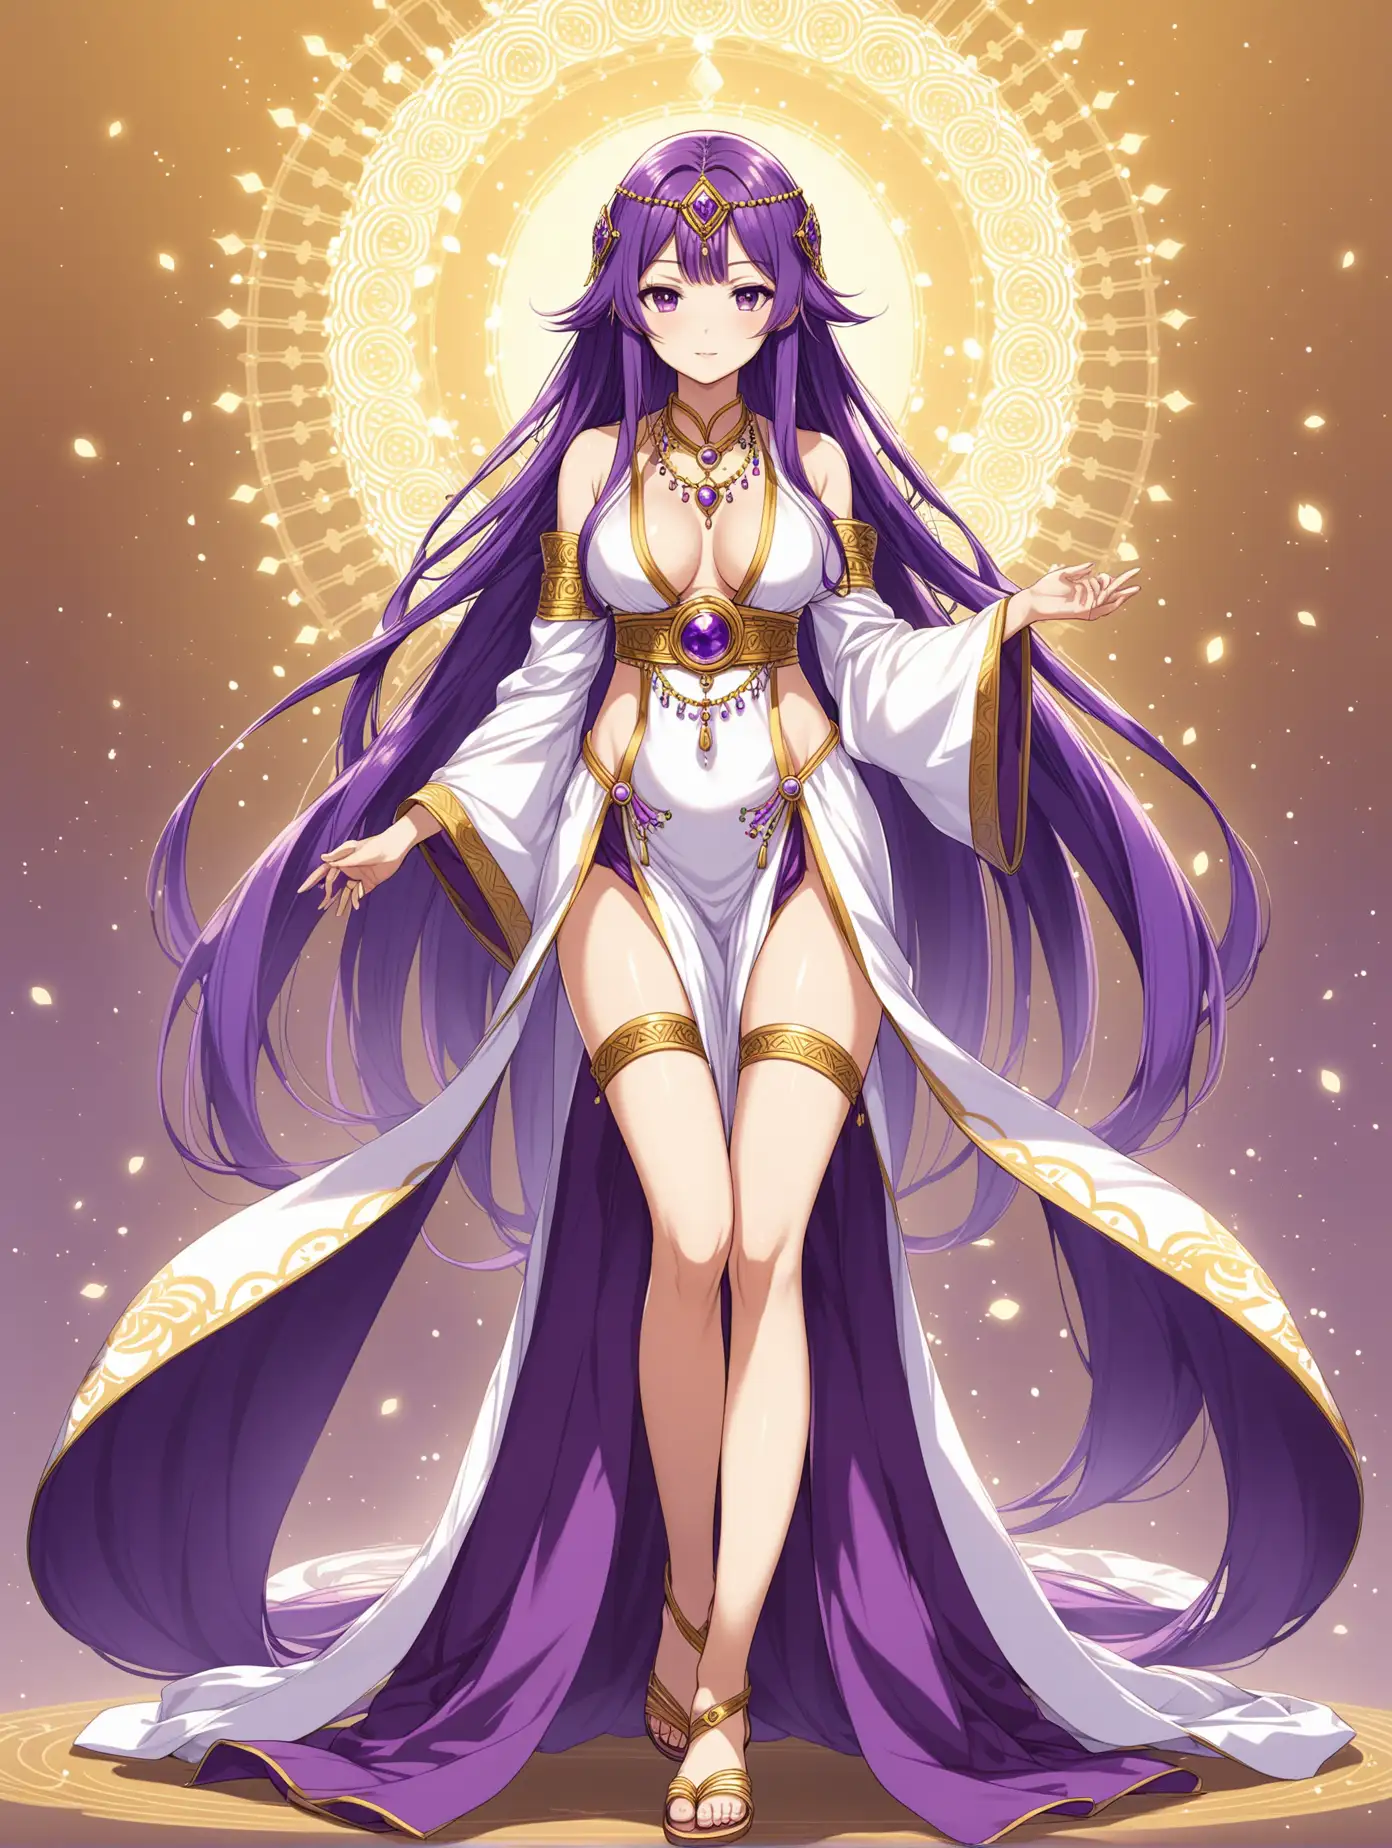 Full body image of a long hair sensual anime priestess girl with purple hair wearing sandals